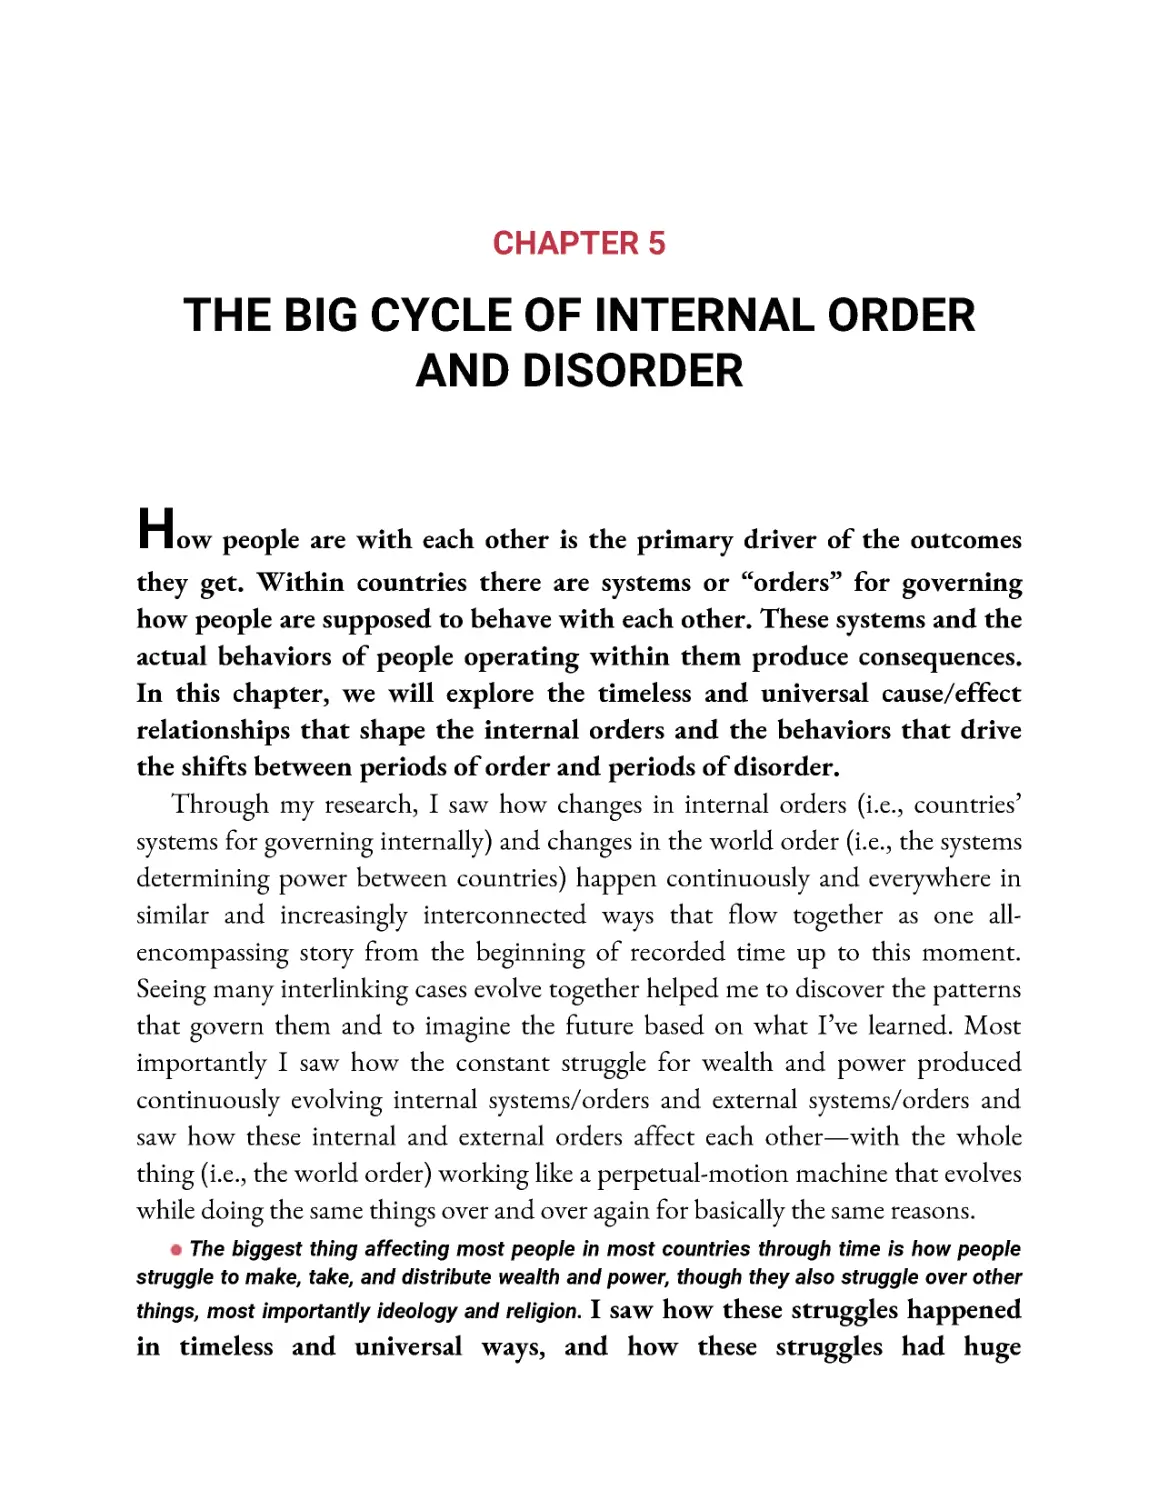 ﻿Chapter 5: The Big Cycle of Internal Order and Disorde